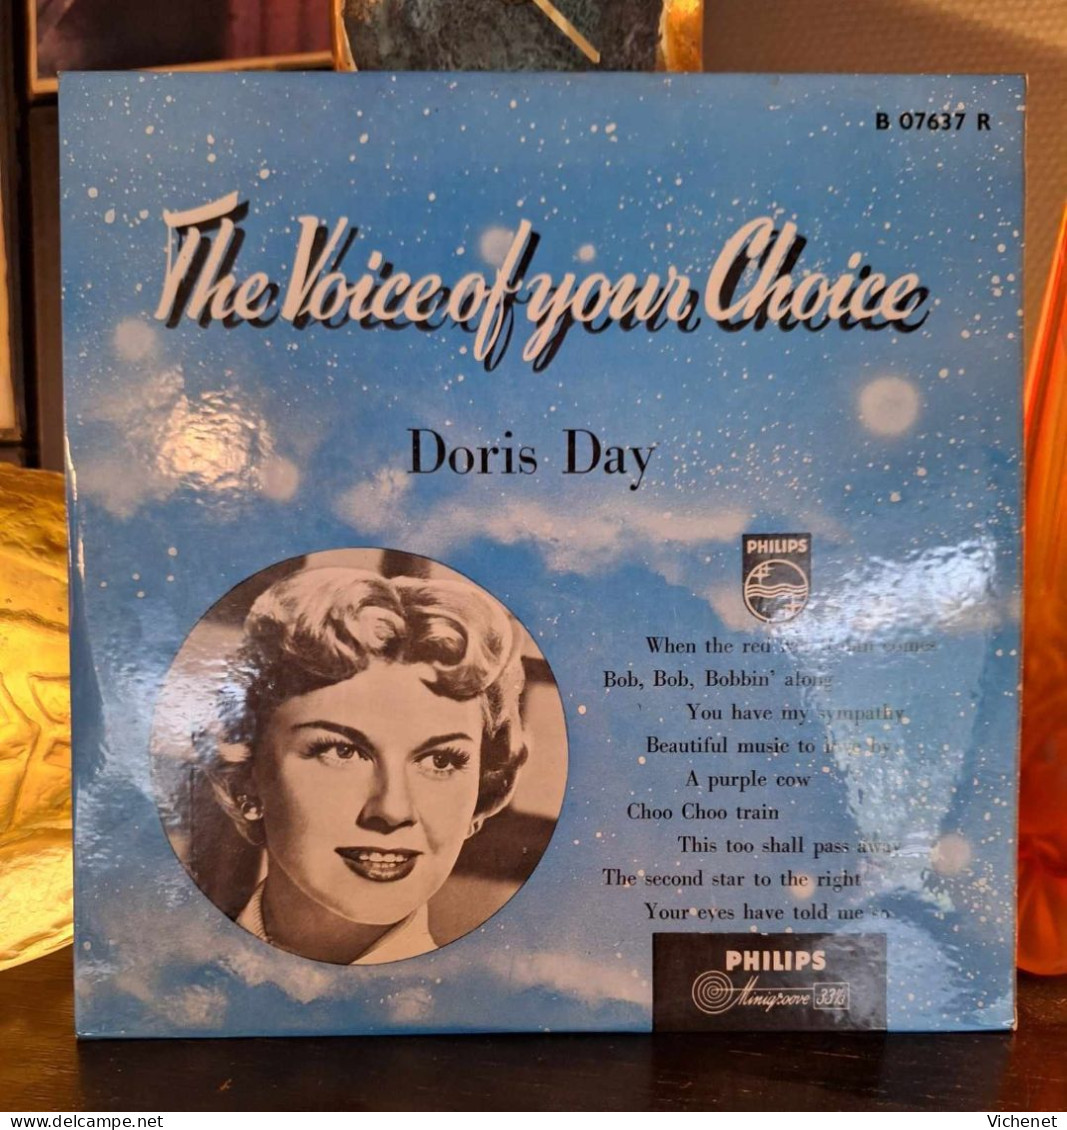 Doris Day - The Voice Of Your Choice - 25 Cm - Special Formats